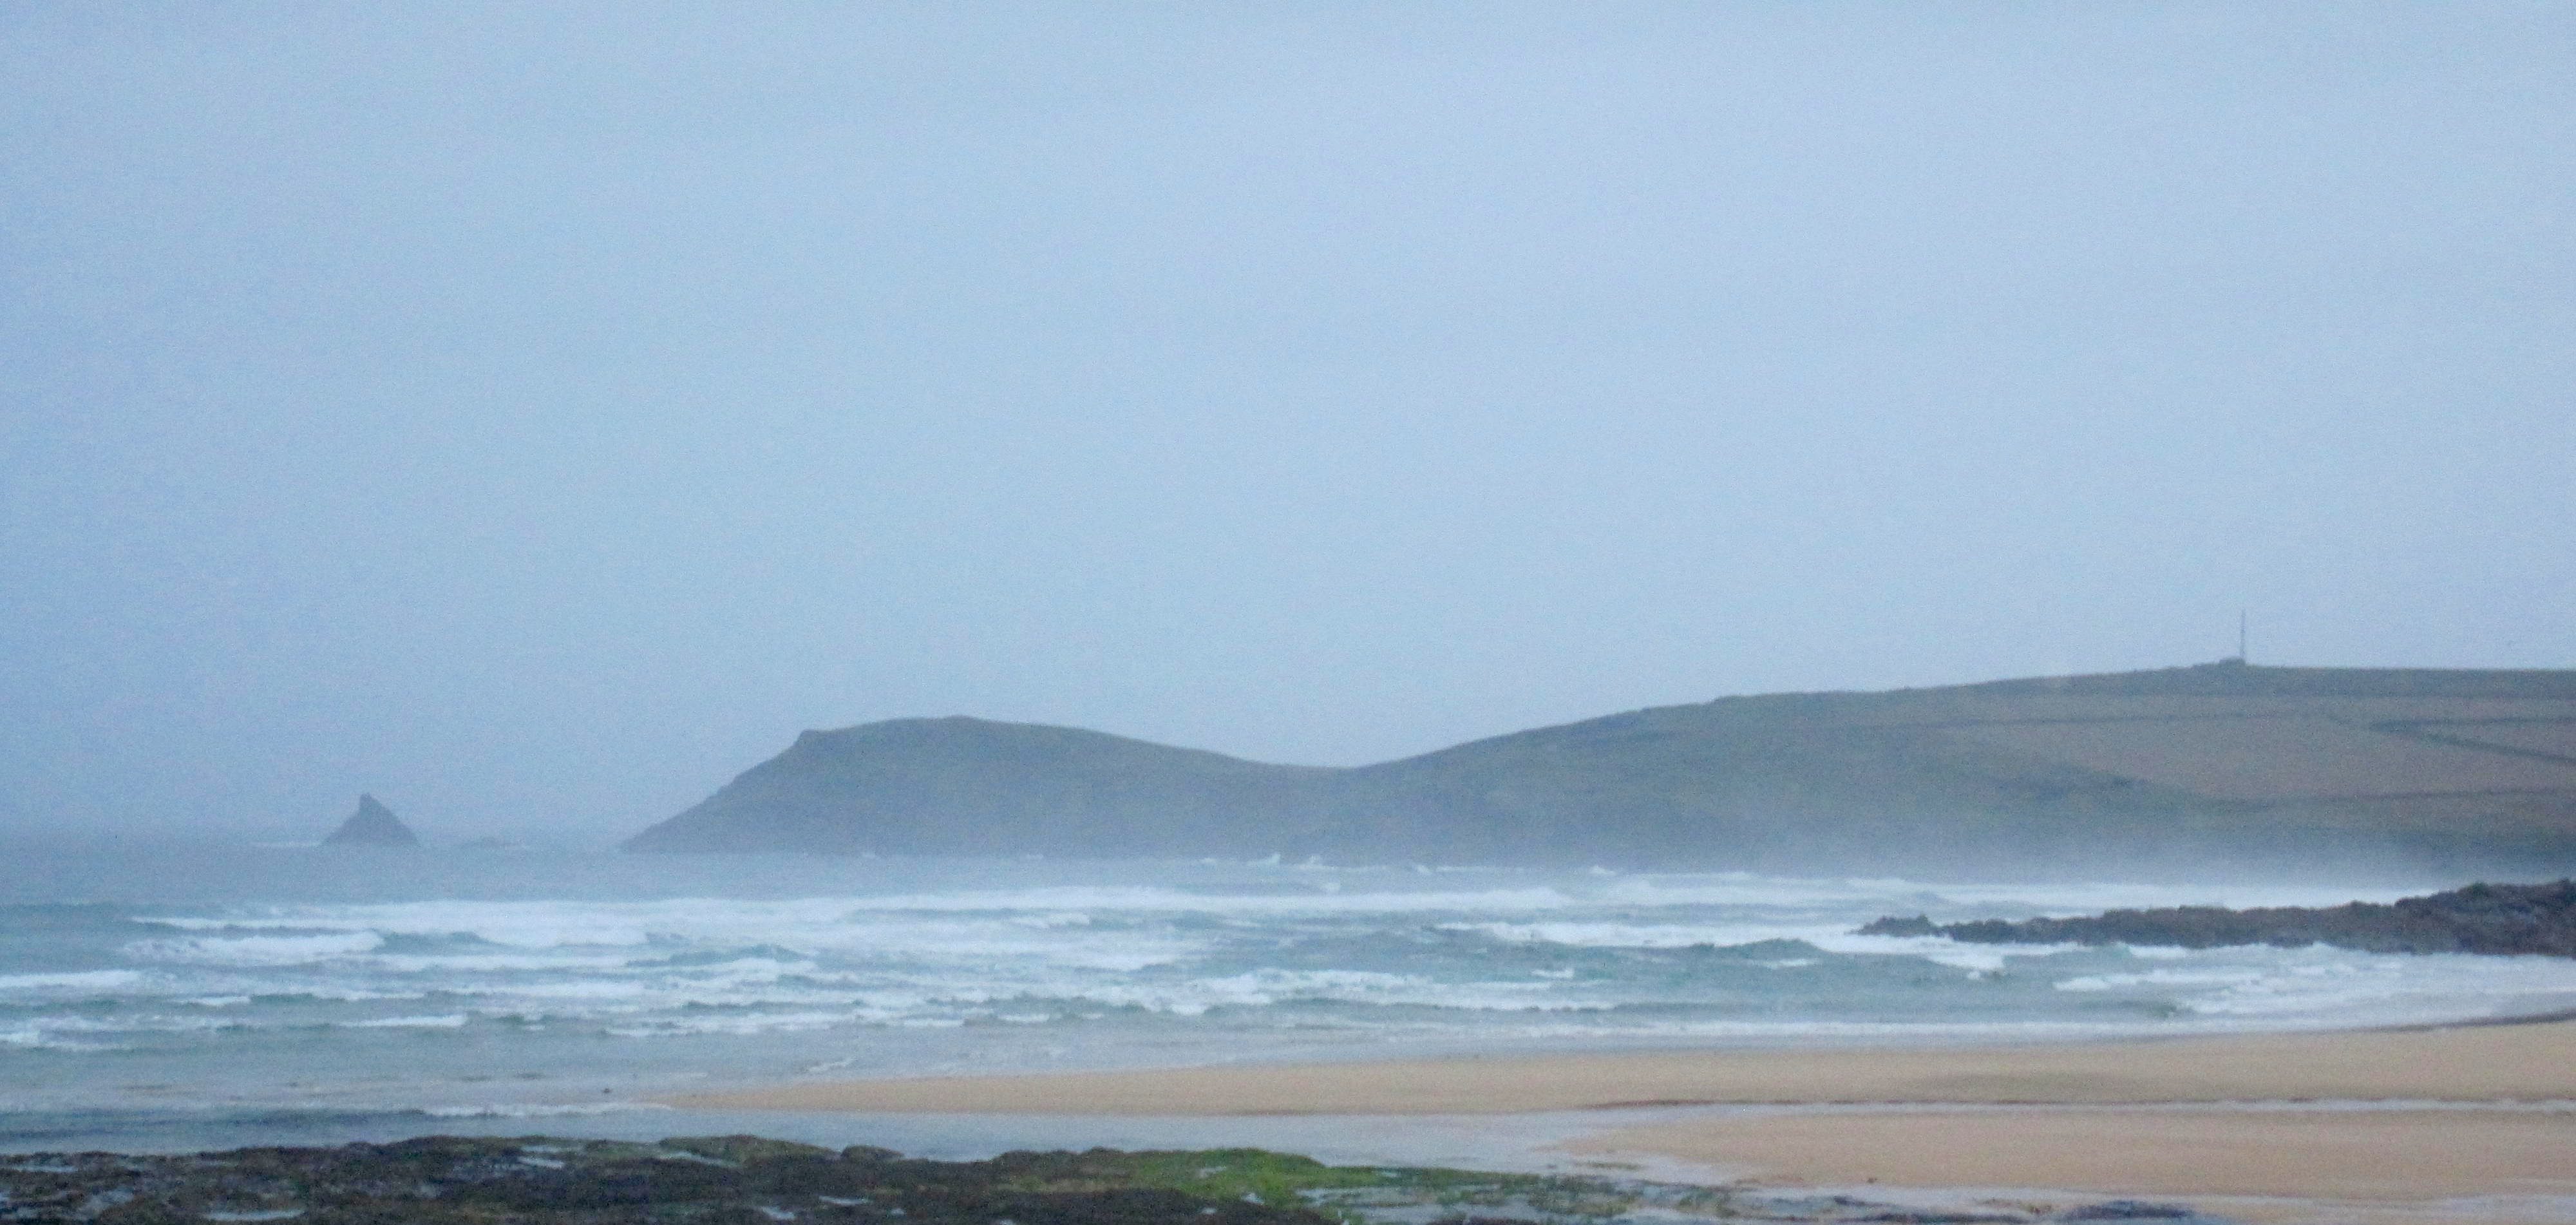 Surf Report for Saturday 22nd August 2015